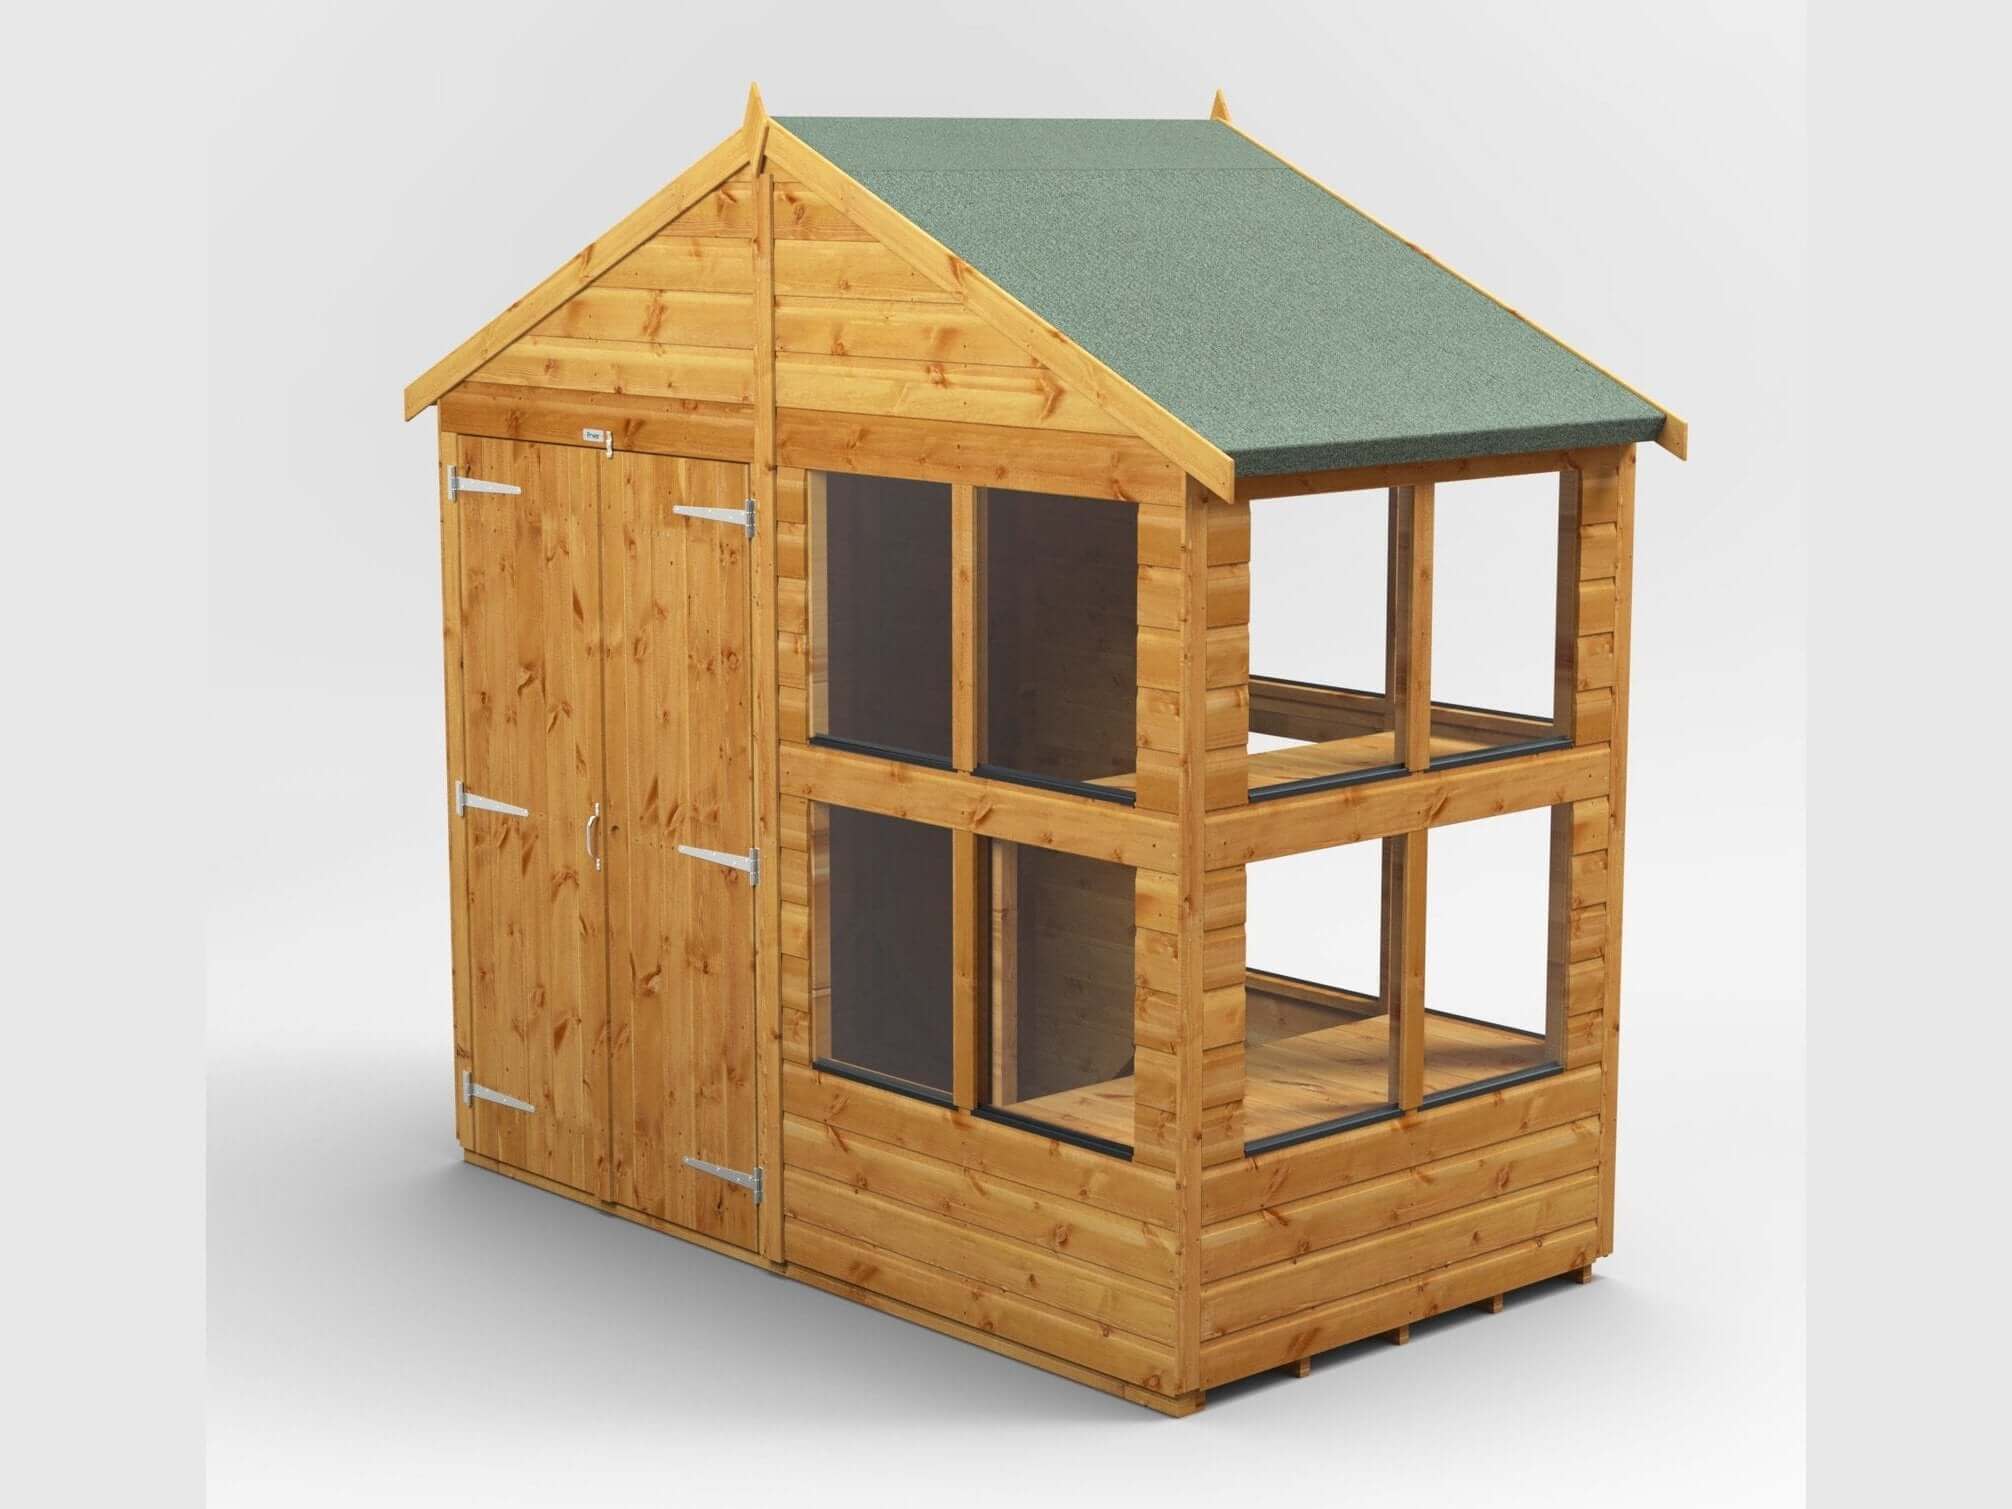 Power Apex Wooden Potting Shed Various Sizes Shed Sizes: Power Apex Potting Shed 4x8